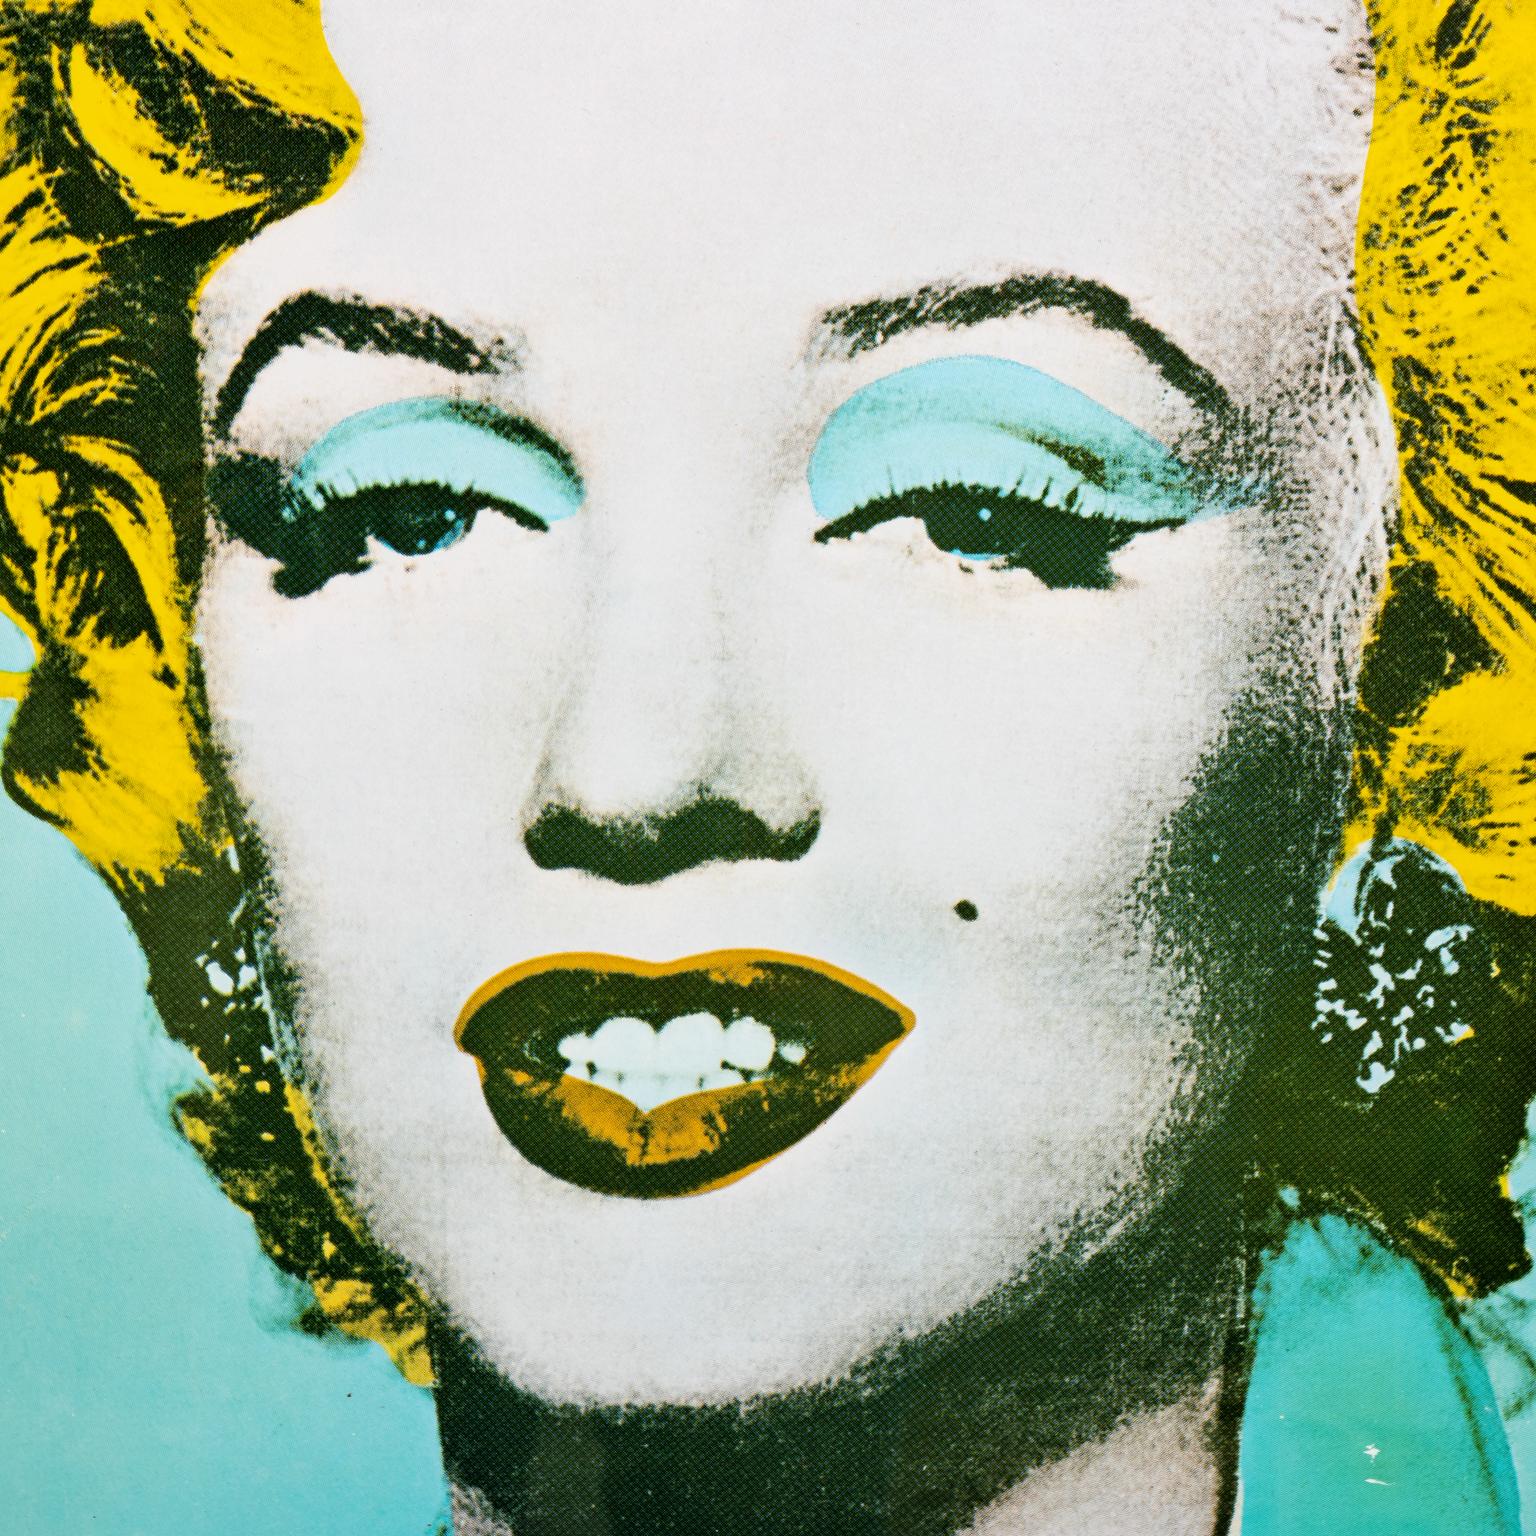 Framed Warhol Print of Marilyn Monroe In Good Condition For Sale In Stamford, CT